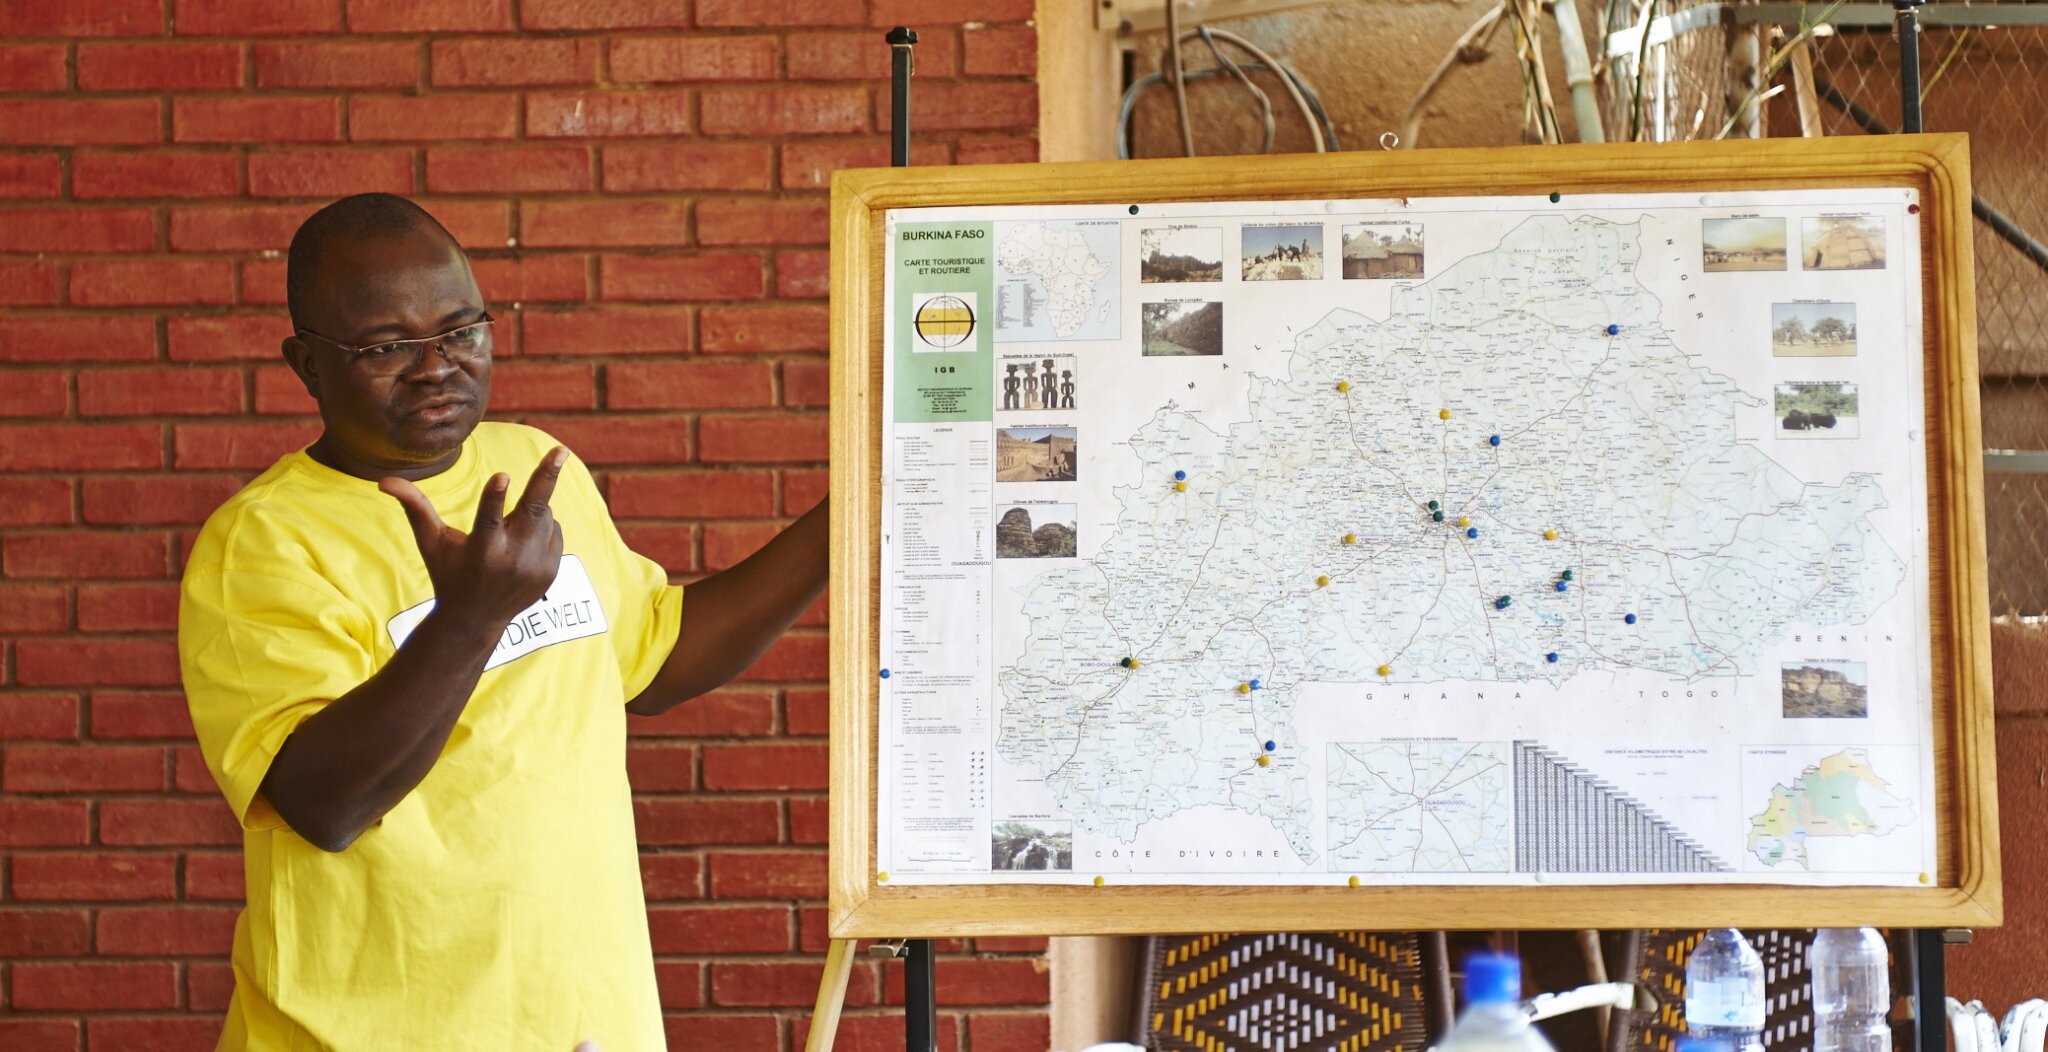 Elie Bagbila, a Burkinabe man with glasses and a yellow T-shirt speaks next to a Burkina Faso map